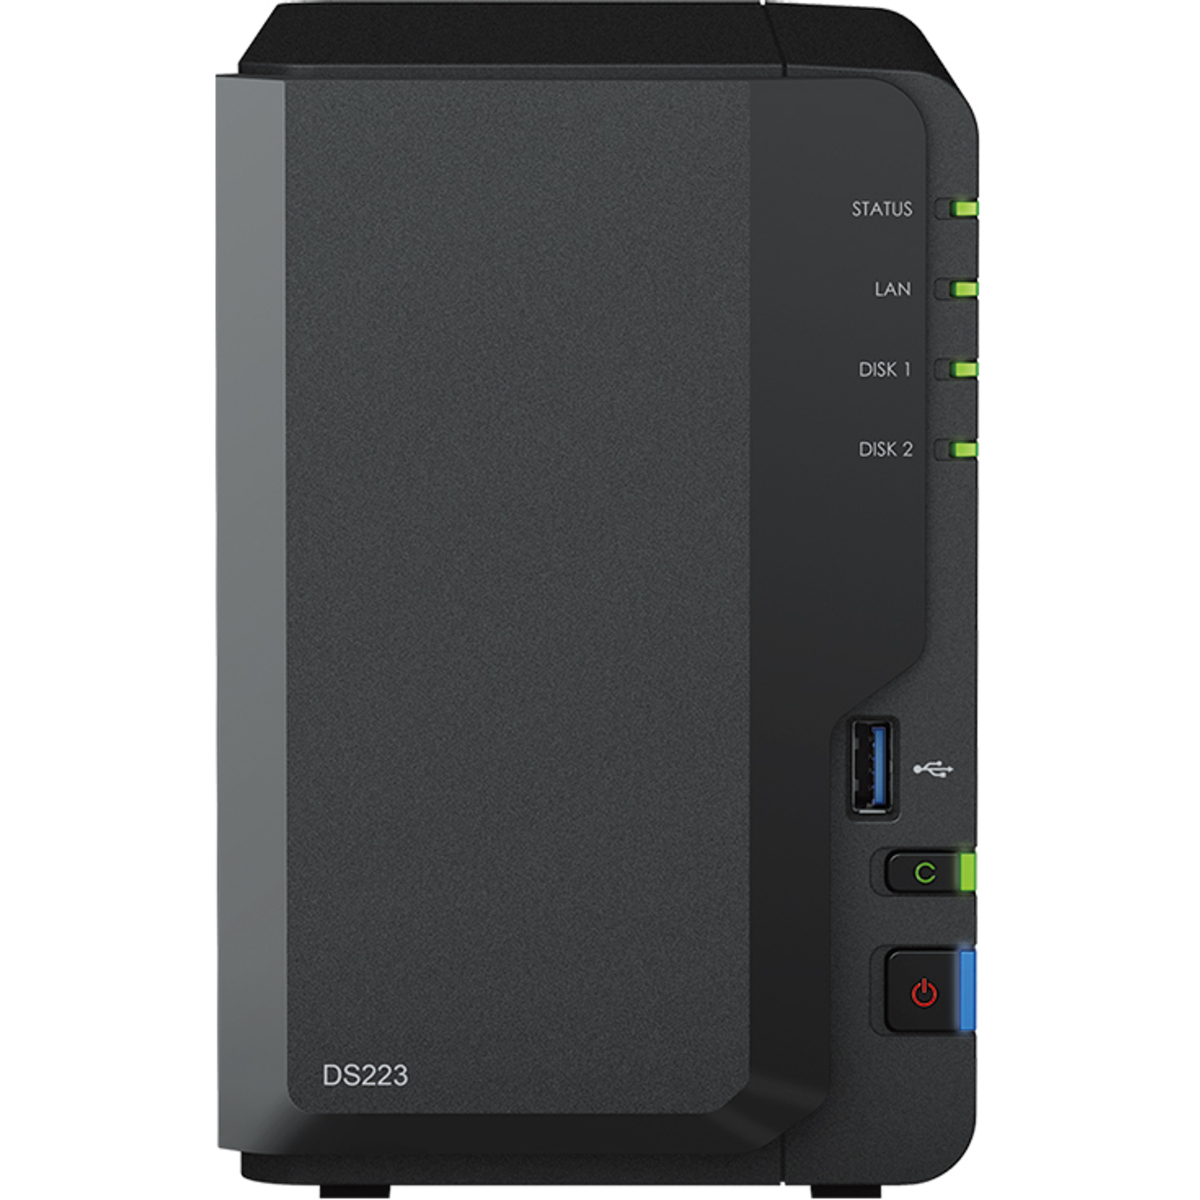 Synology DiskStation DS223 44tb 2-Bay Desktop Personal / Basic Home / Small Office NAS - Network Attached Storage Device 2x22tb Western Digital Ultrastar HC580 WUH722422ALE6L4 3.5 7200rpm SATA 6Gb/s HDD ENTERPRISE Class Drives Installed - Burn-In Tested DiskStation DS223